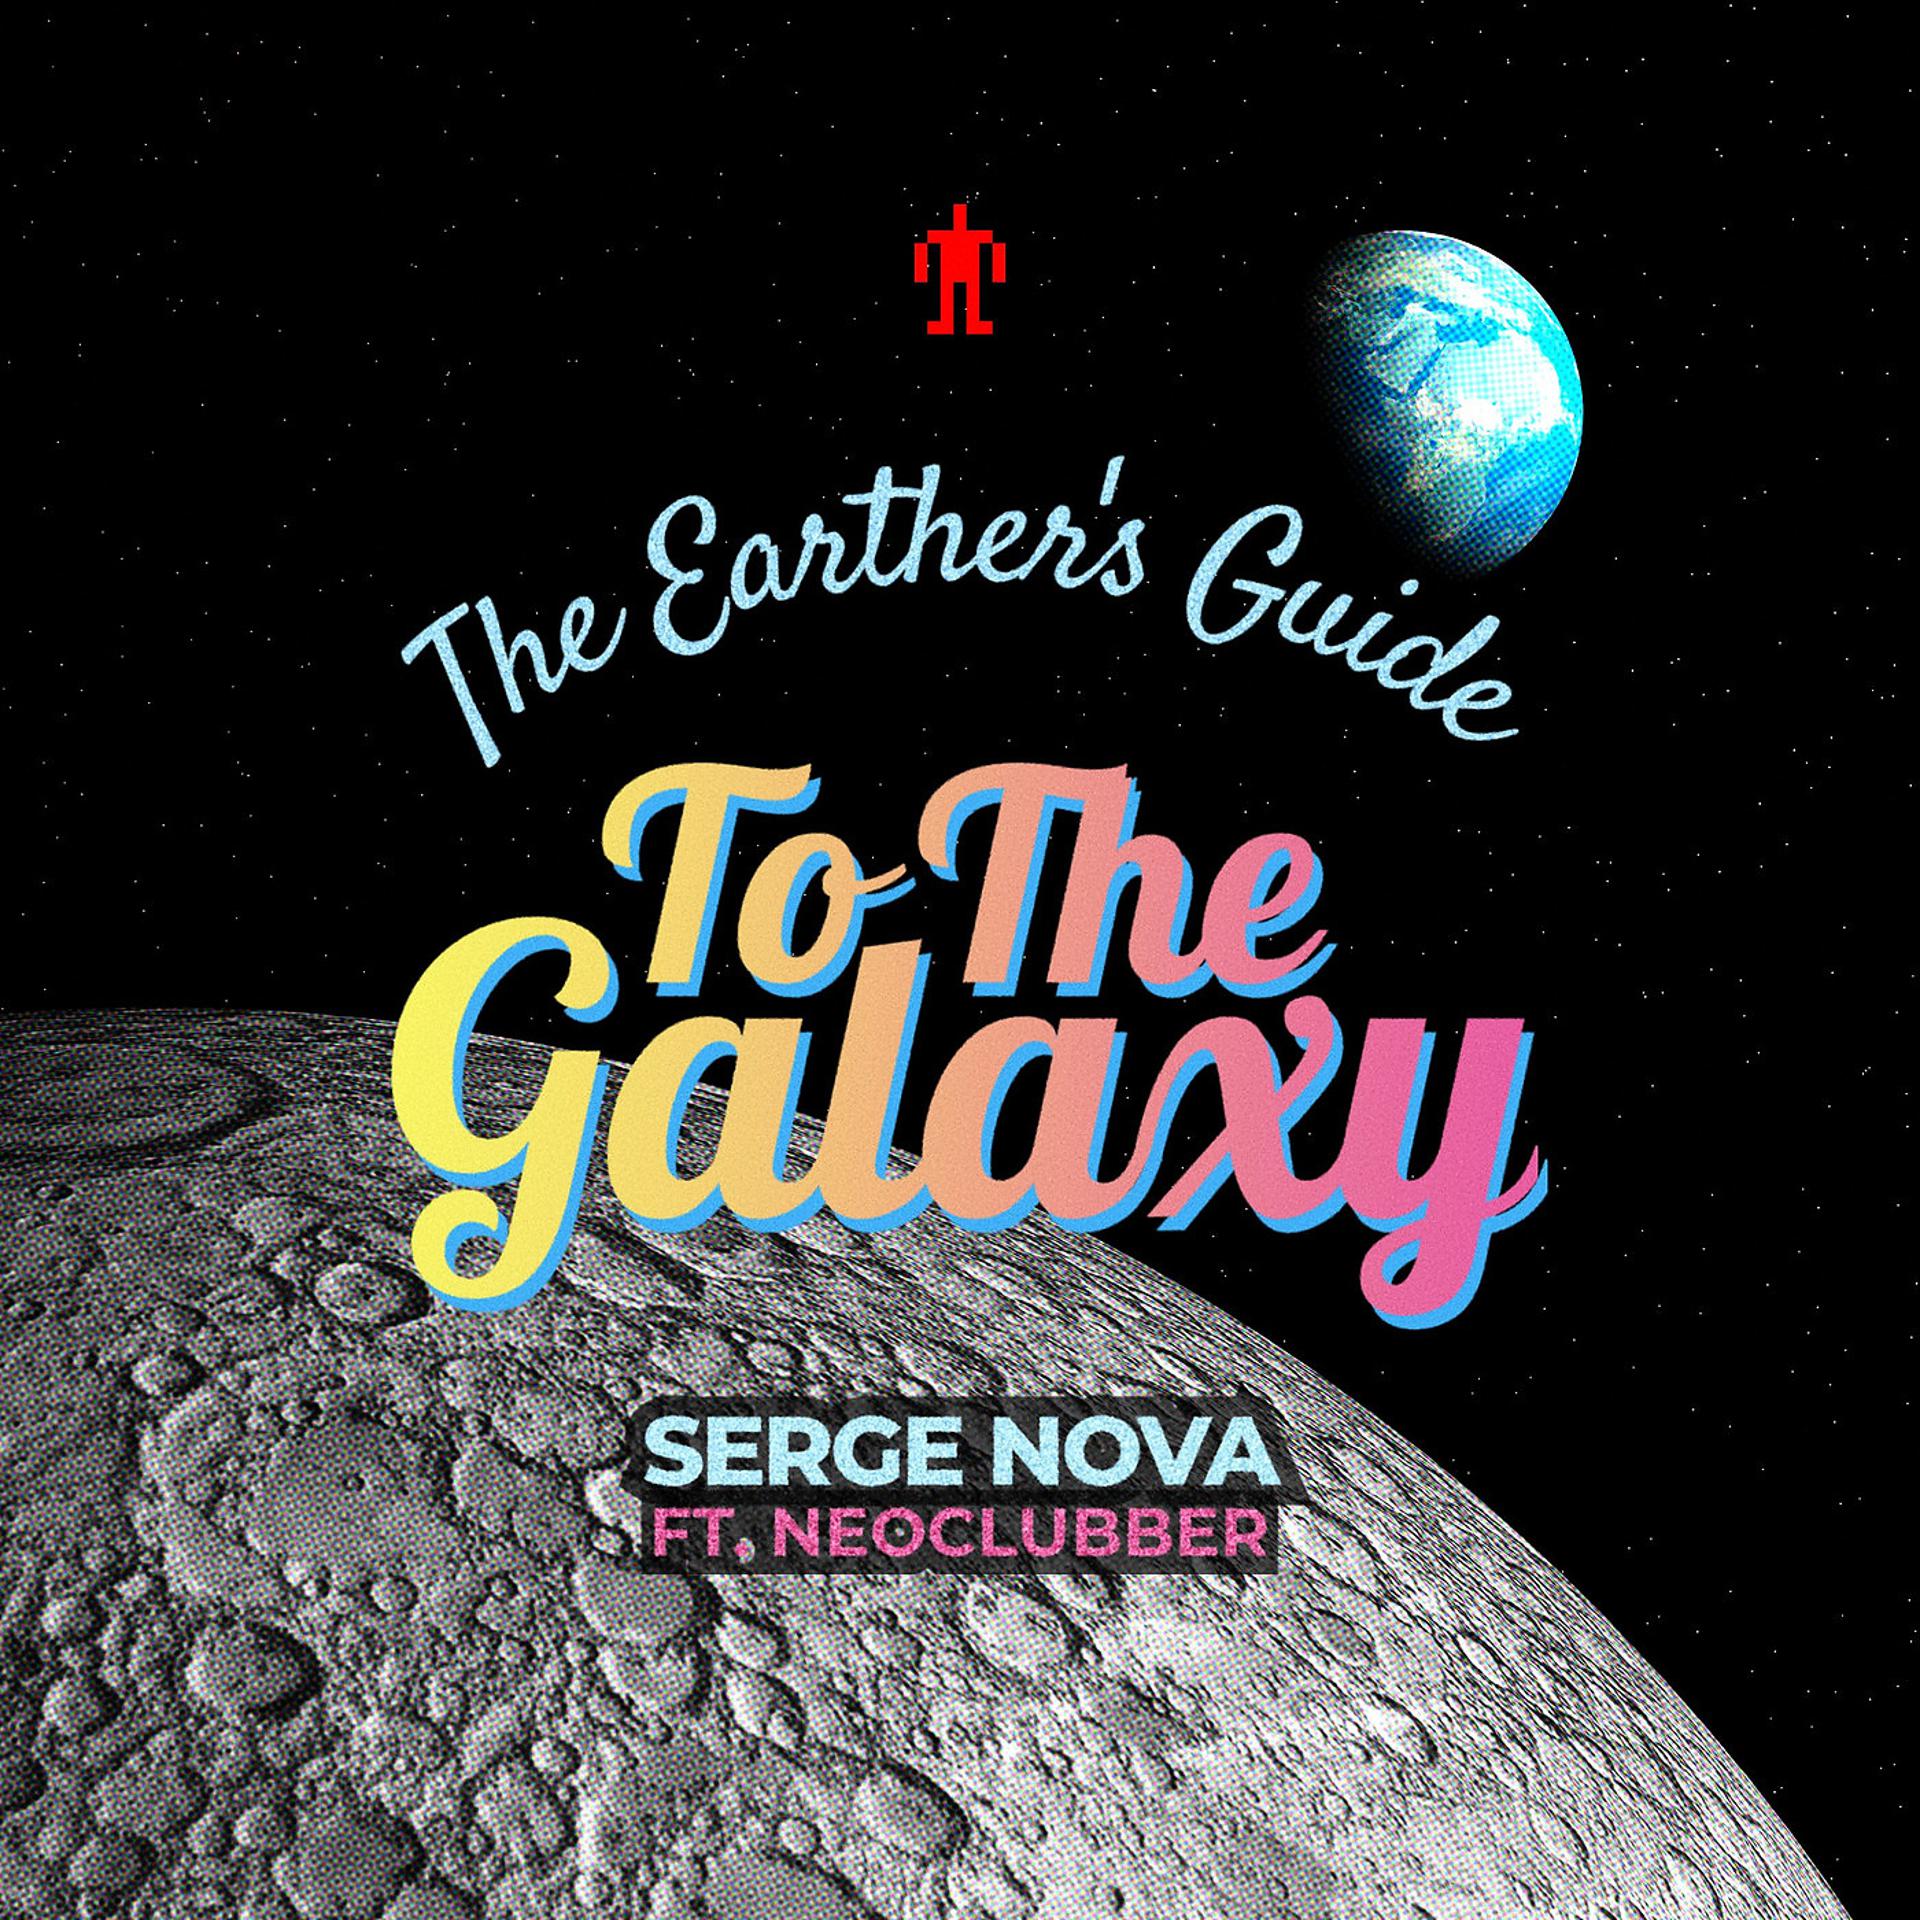 Постер альбома The Earther’s Guide to the Galaxy